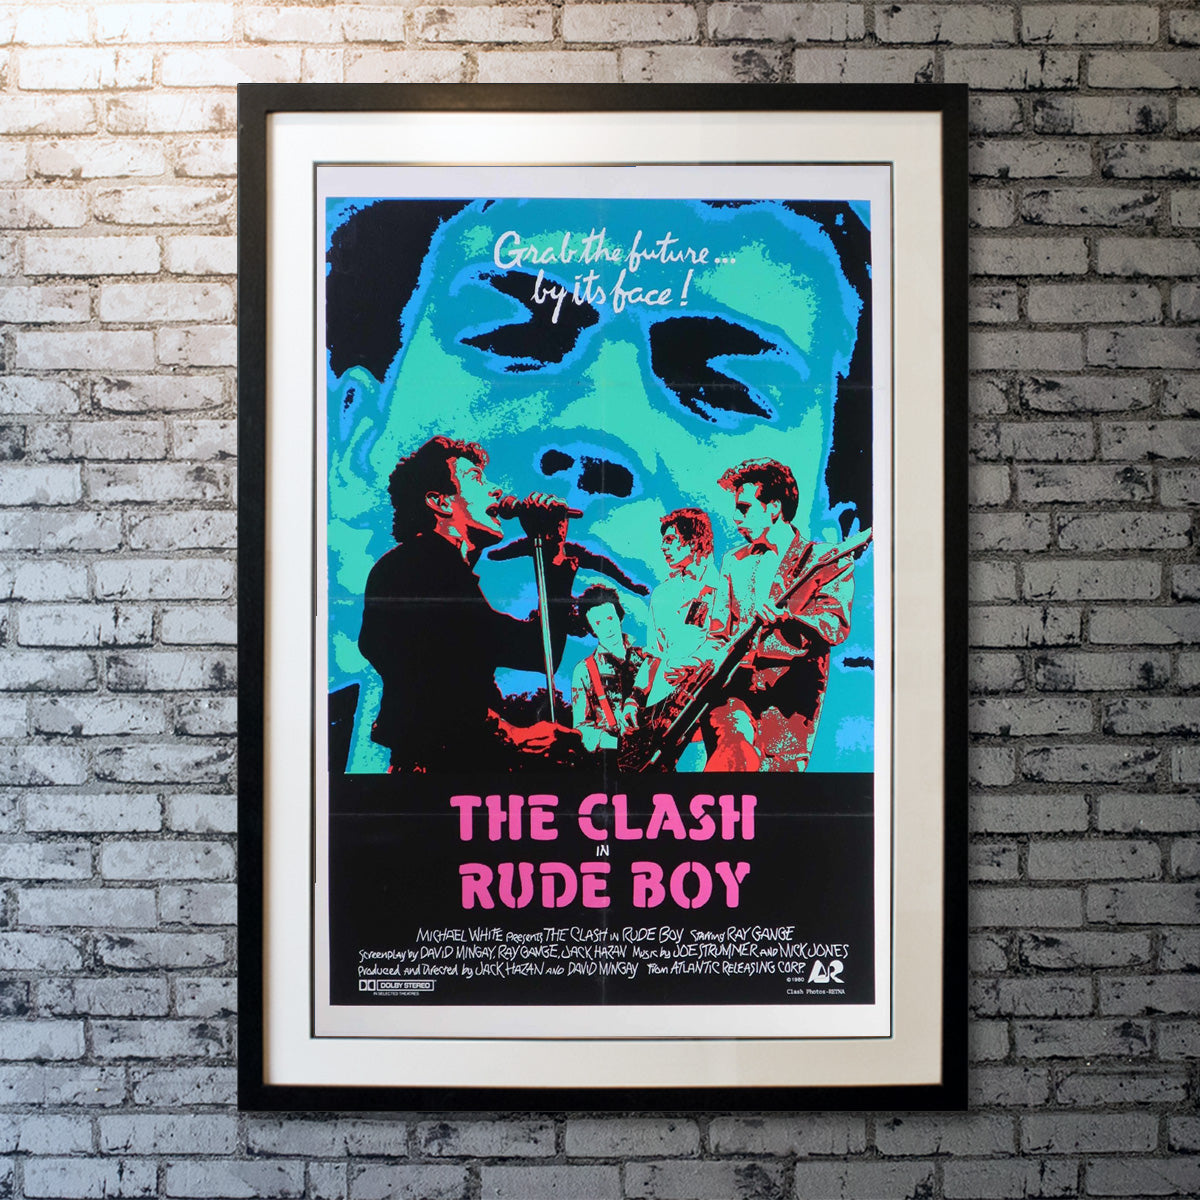 Rude Boy featuring The Clash (1980)